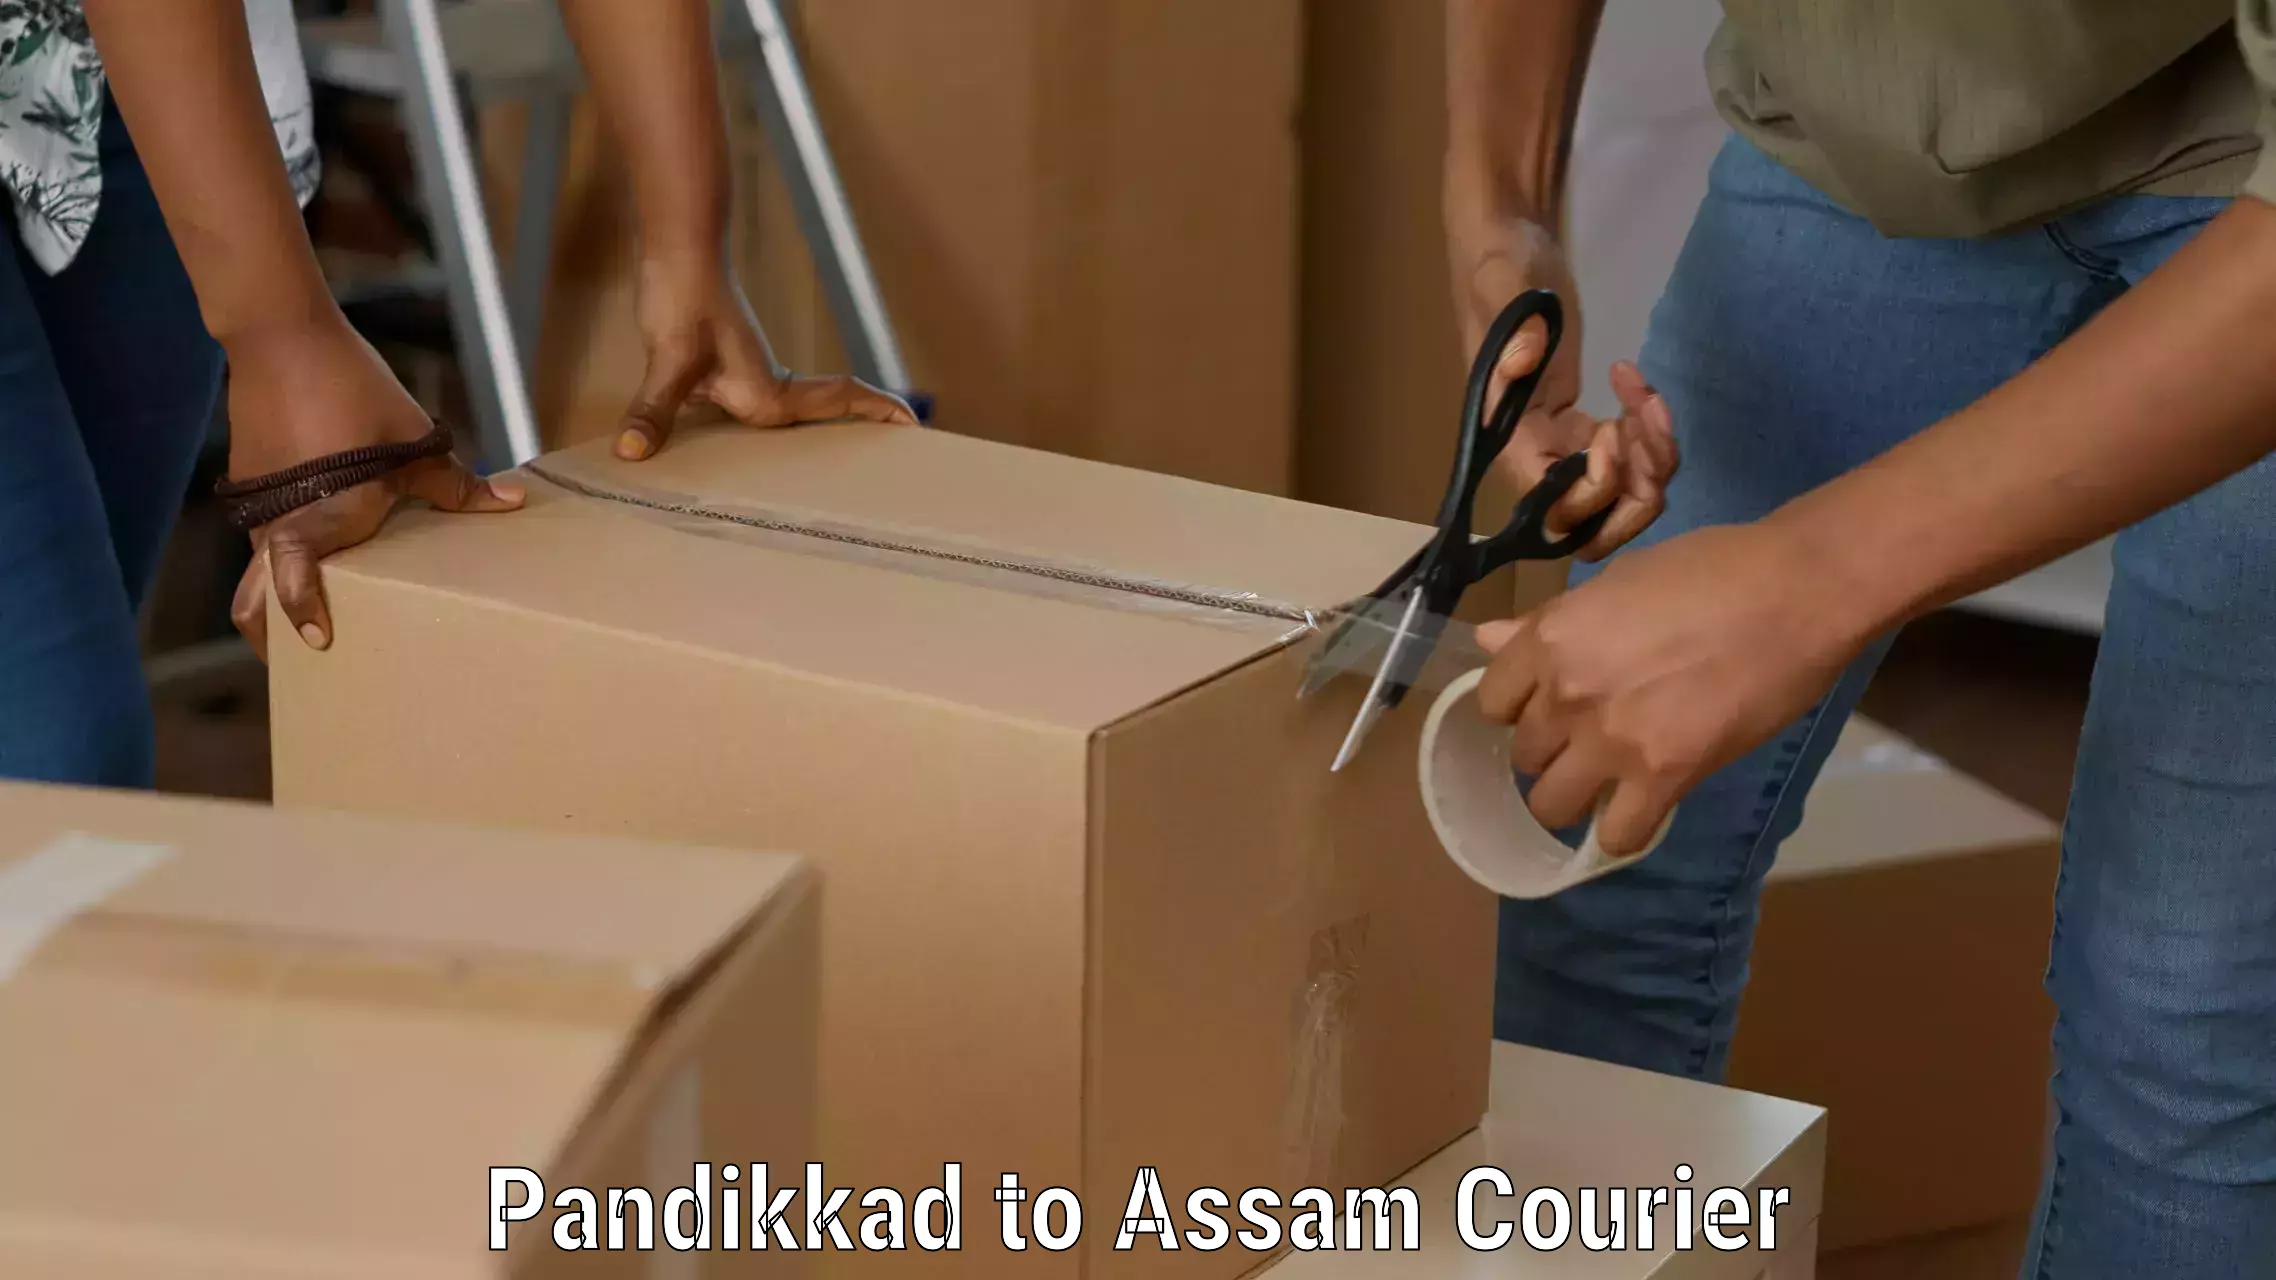 High-quality delivery services Pandikkad to Nagaon